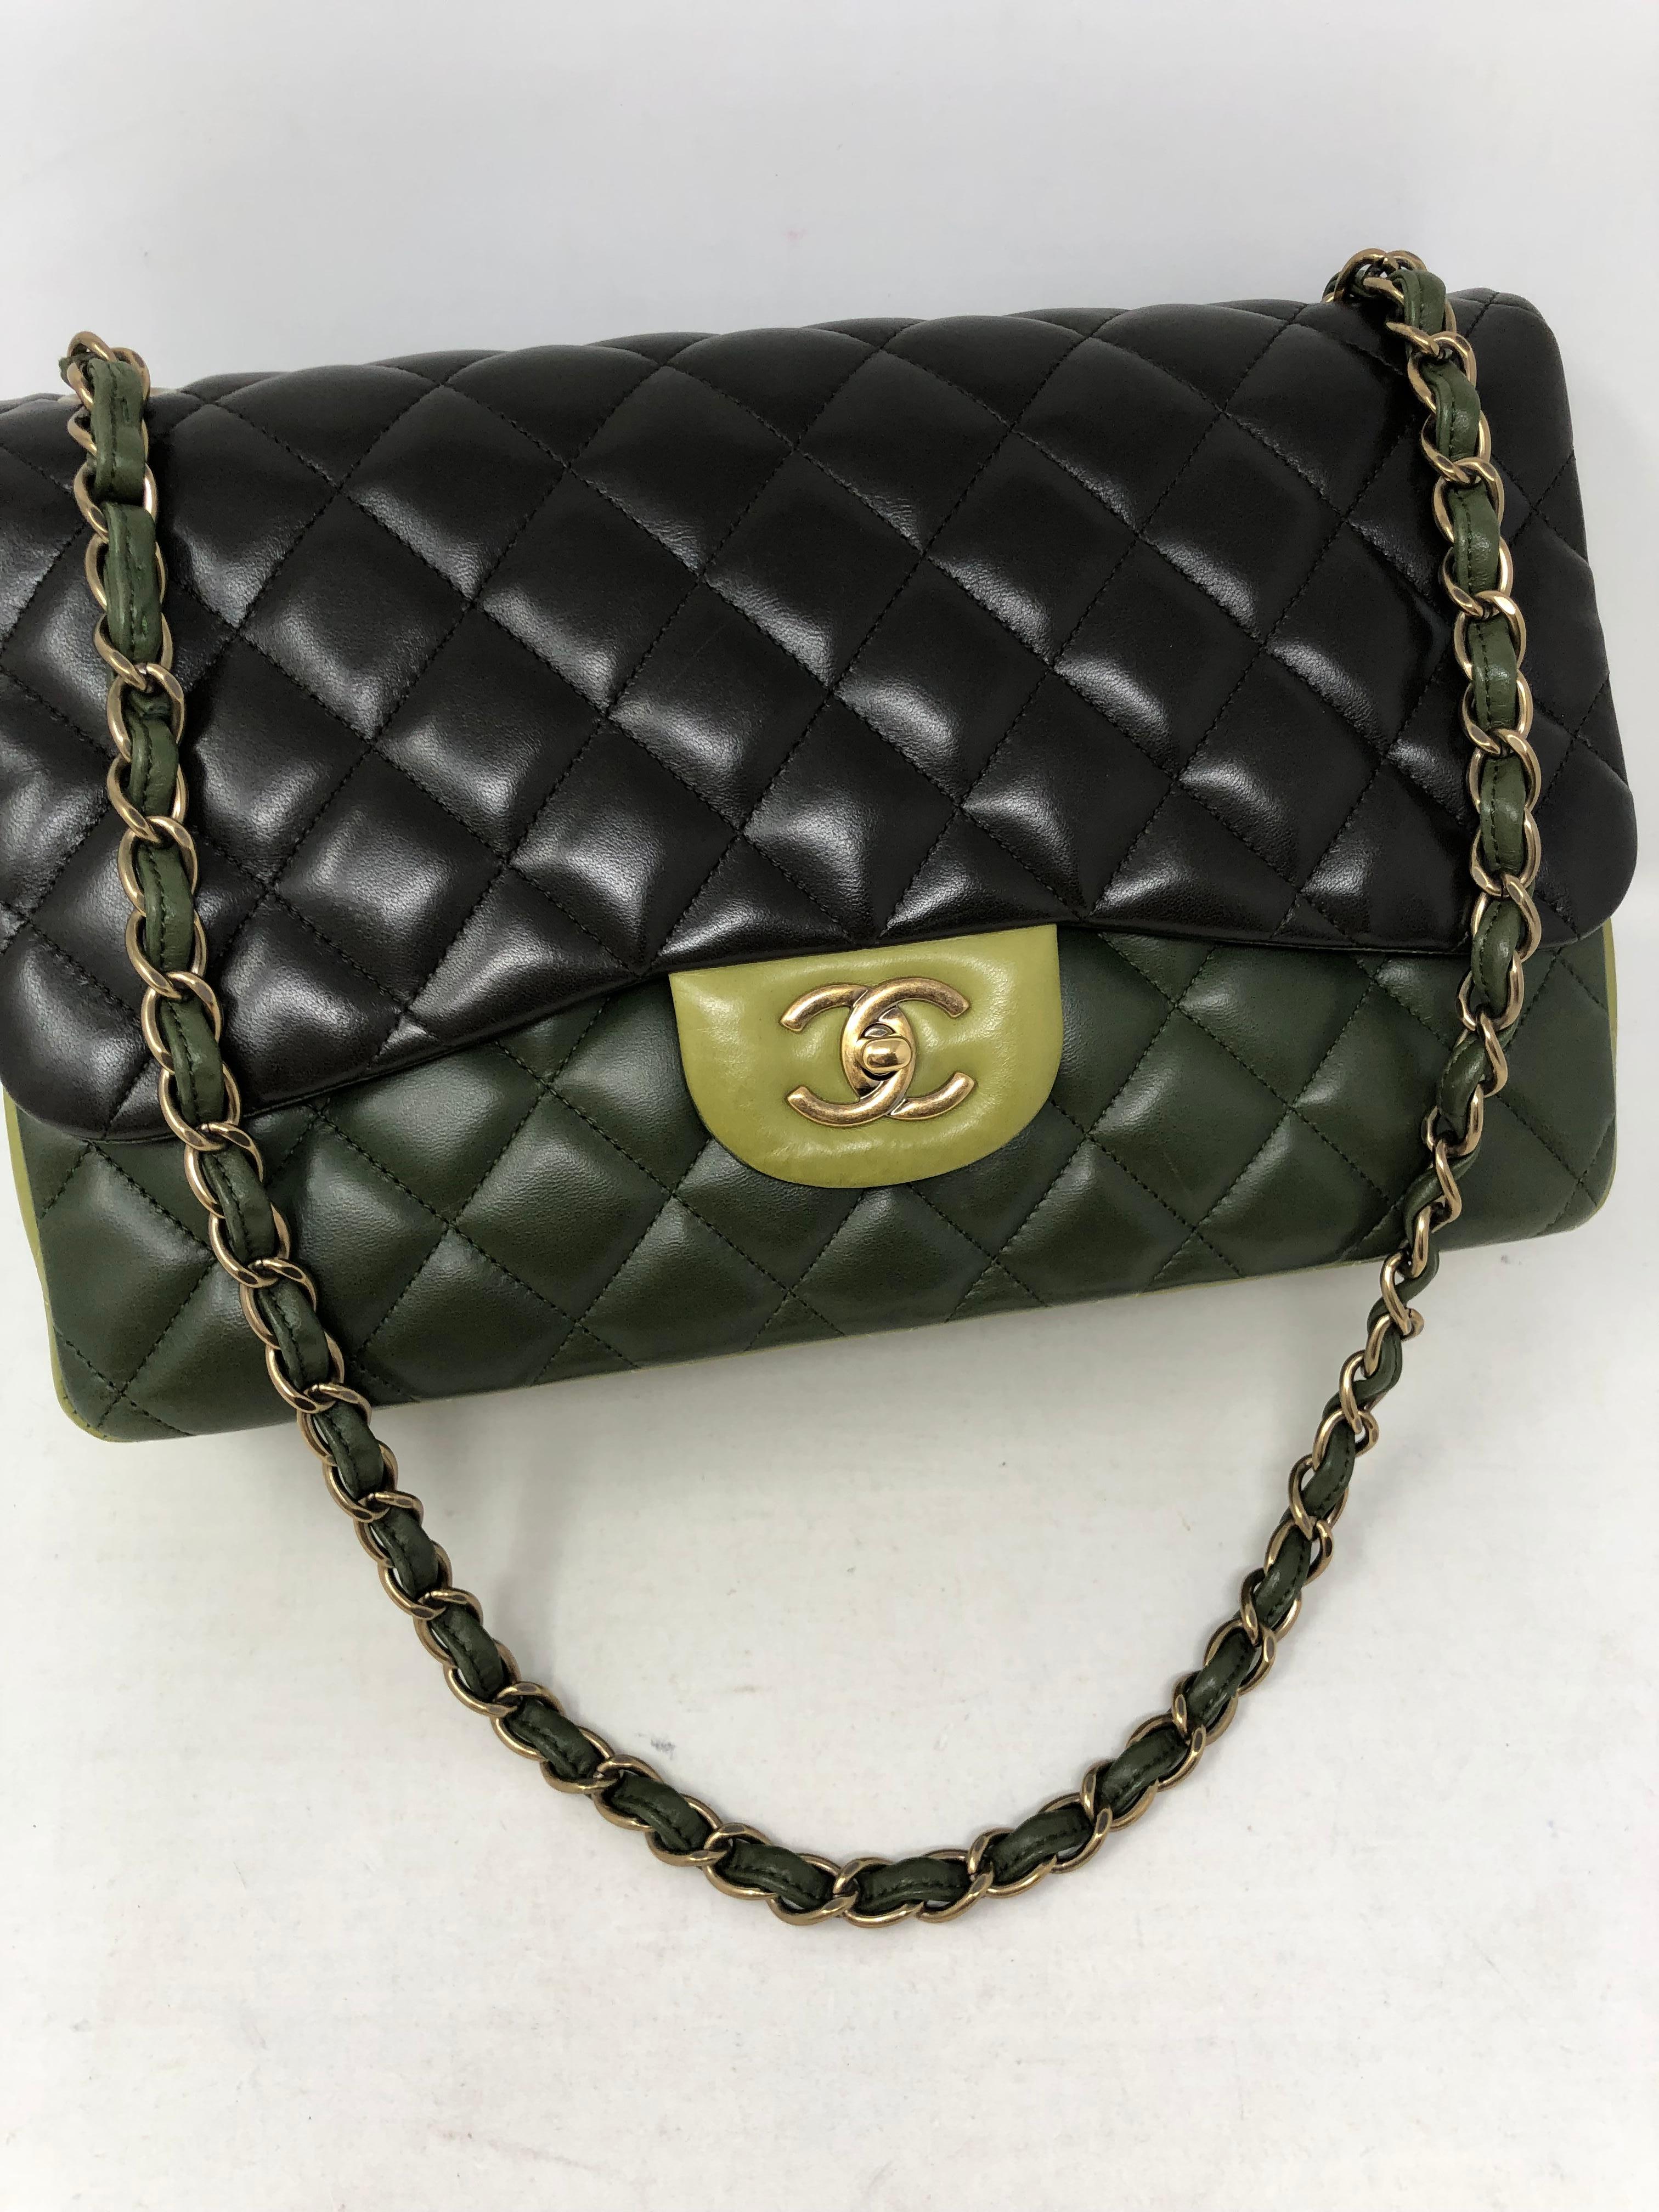 Green Multicolor Double Flap Bag with Matte Gold hardware. Like new condition. Hard to find and a Collector's dream. Guaranteed authentic. 